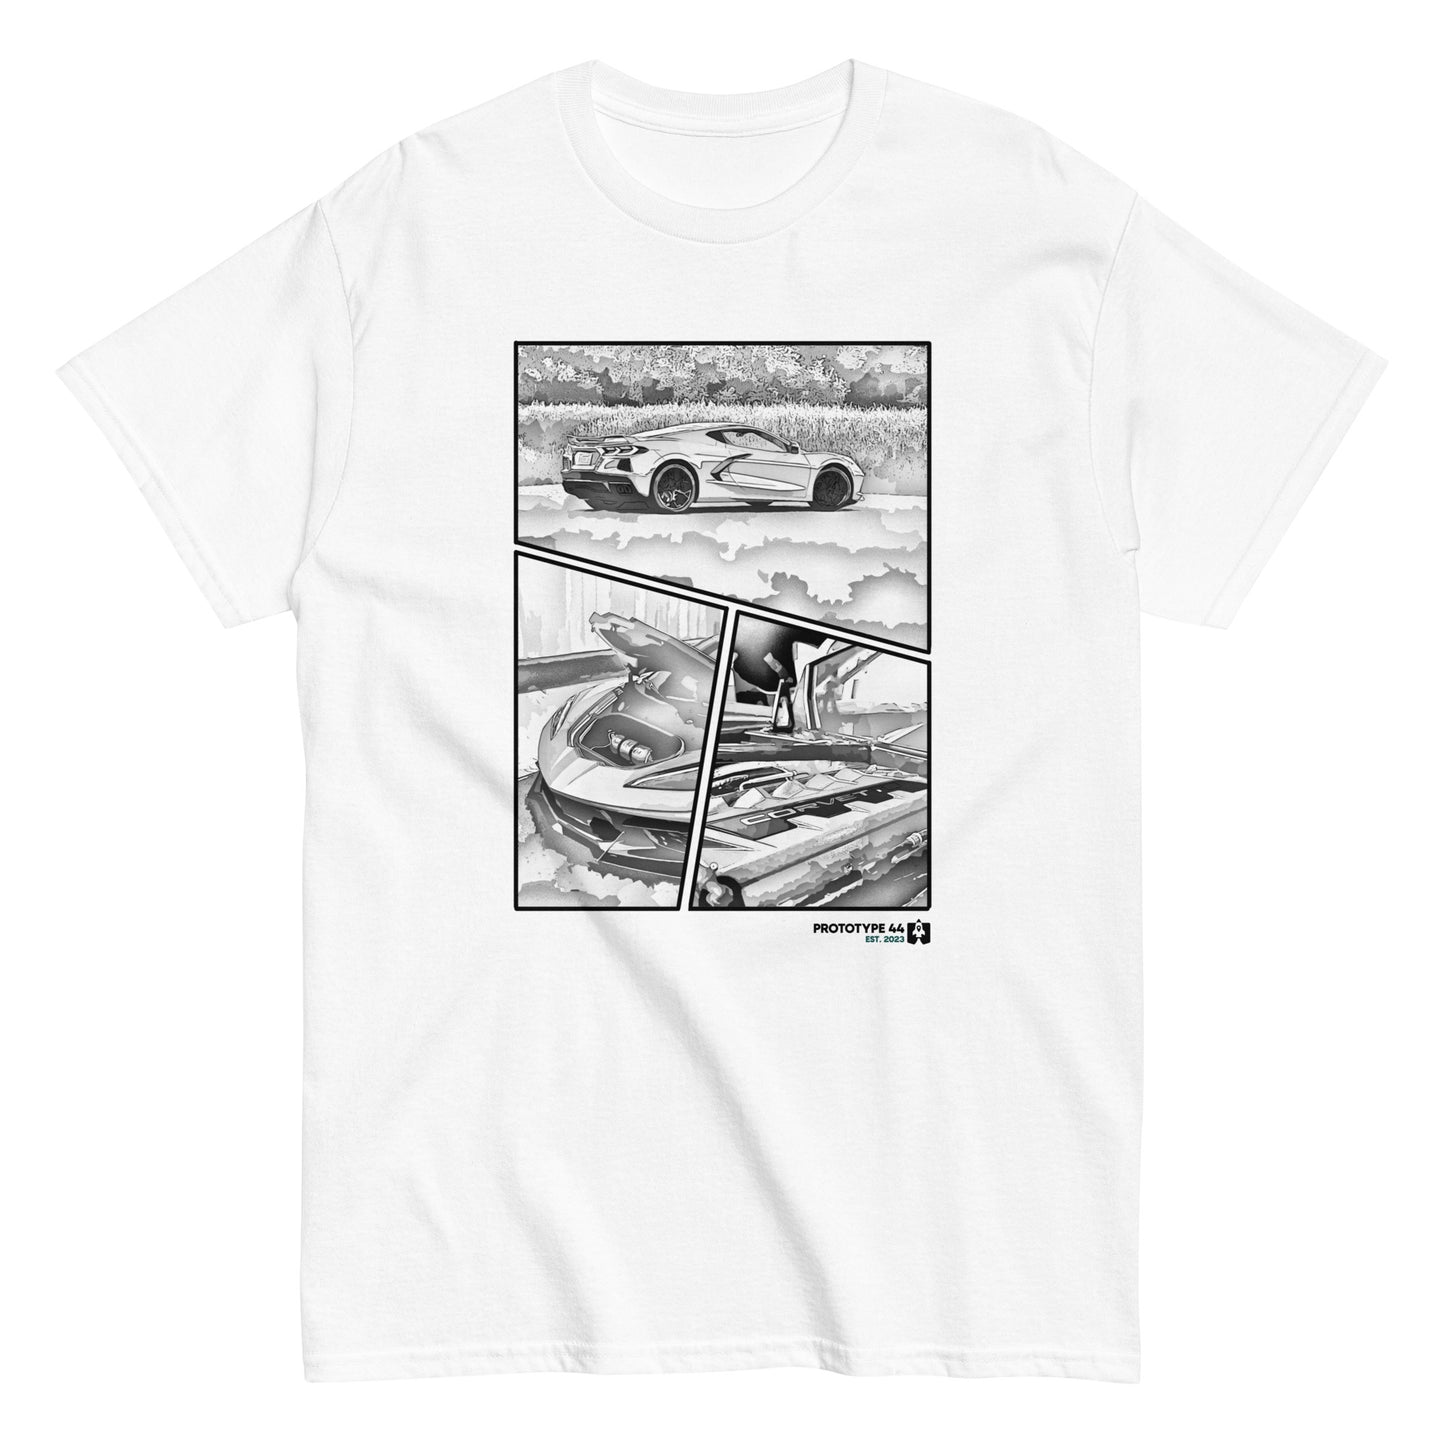 t-shirt with 3 panel manga, corvette side view, engine bay, frunk open